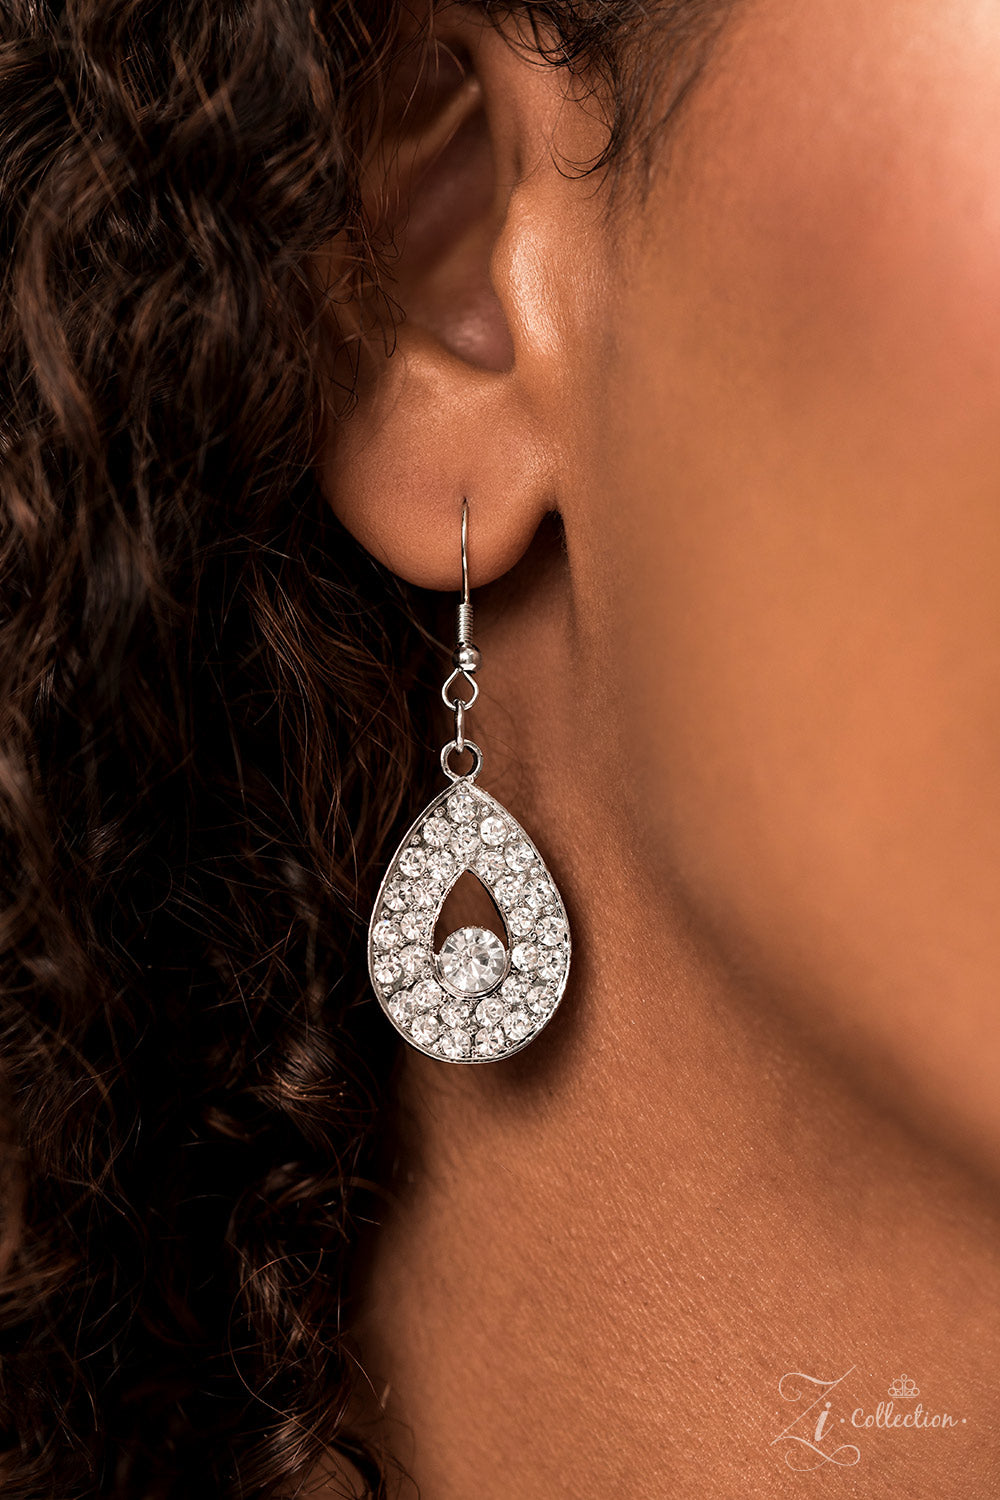 Silver, teardrop-shaped frames are stacked on-point below airy marquise cutouts, creating a subtle figure-eight. The hourglass shapes are threaded along invisible wires, falling into place alongside diamond-shaped frames, created by artfully aligned, smaller, teardrop silhouettes. Glittery rhinestones encrust the larger teardrop-shaped frames, with solitaire rhinestones dotting the others; the result is a blinding display of irresistible shimmer that leads to a heart-stopping centerpiece.